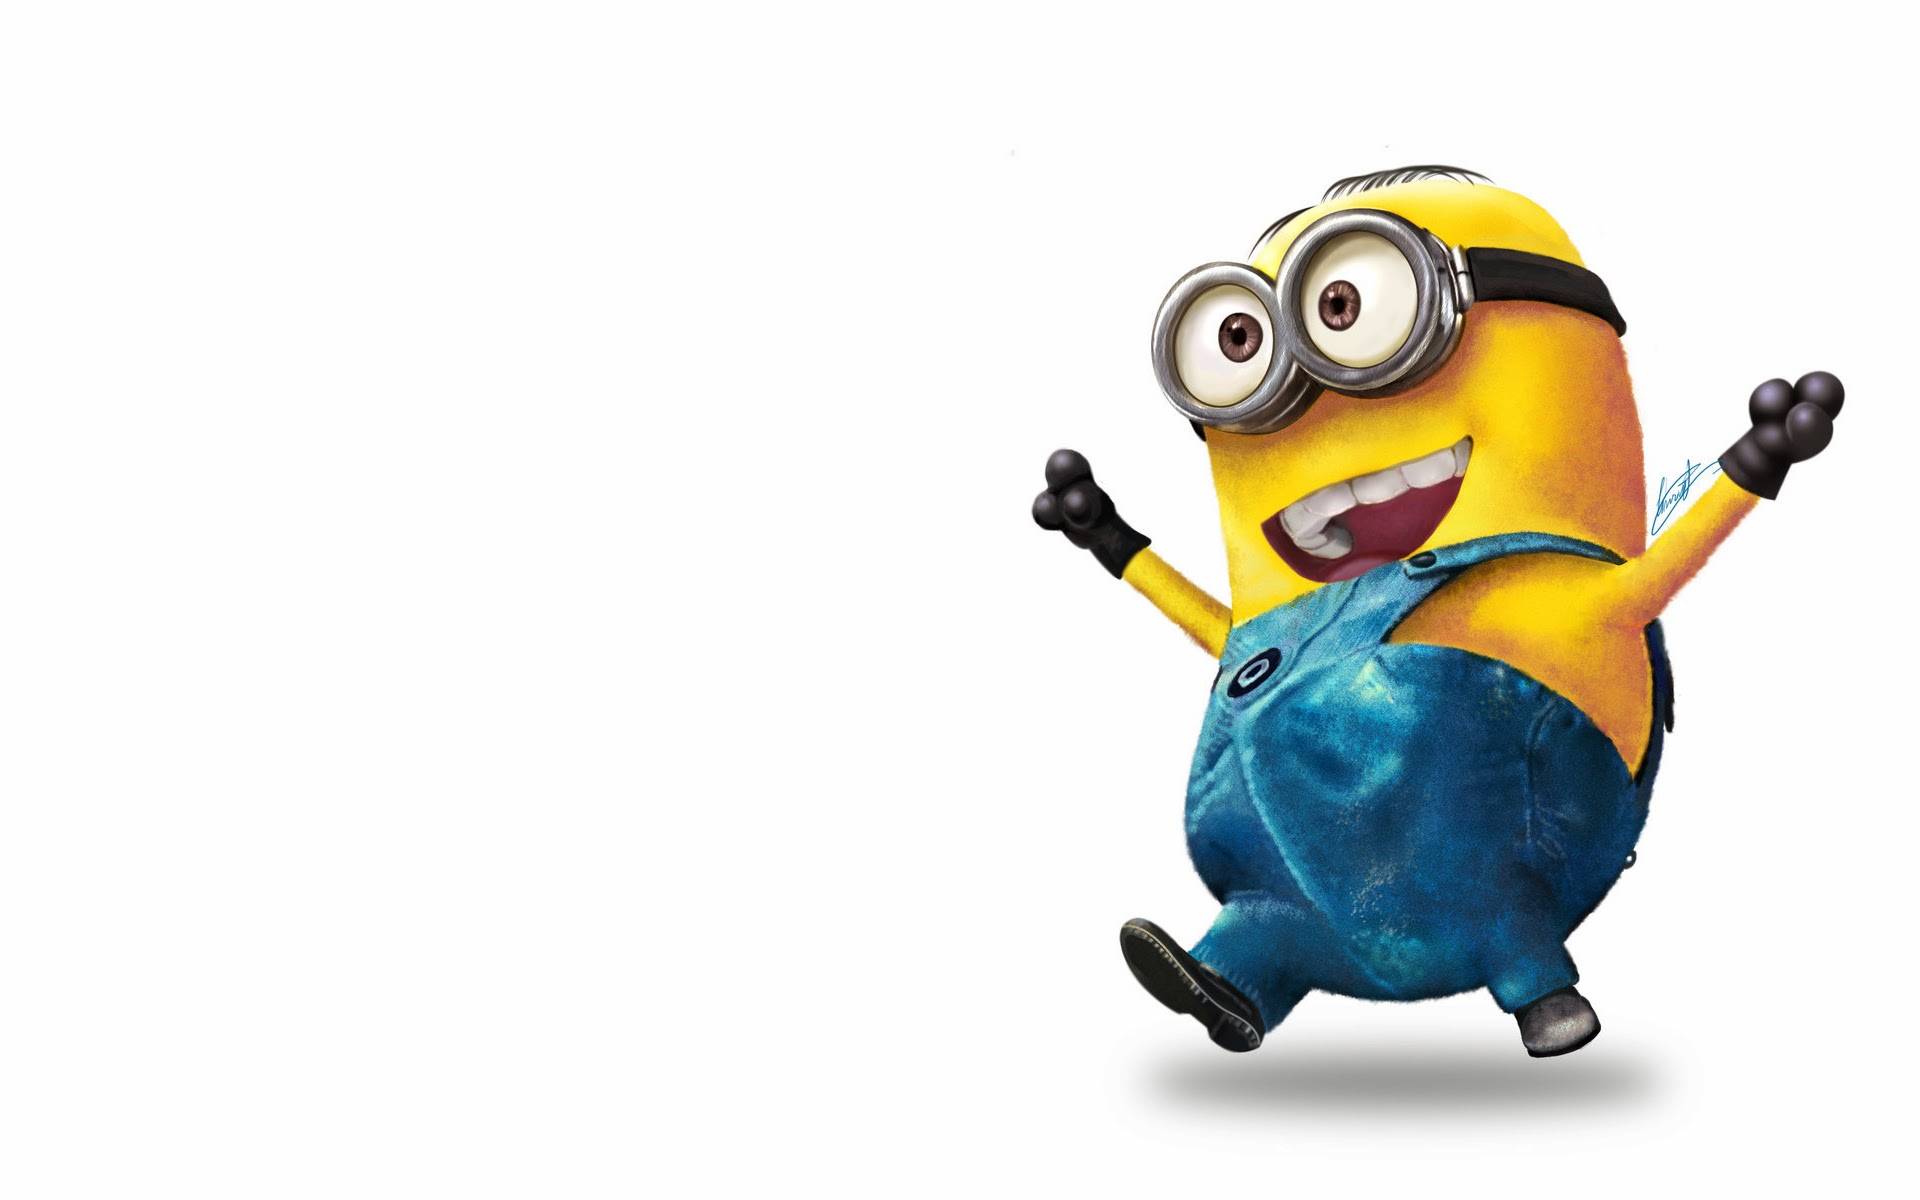 Download Minion In Pitch Black Backdrop Wallpaper | Wallpapers.com